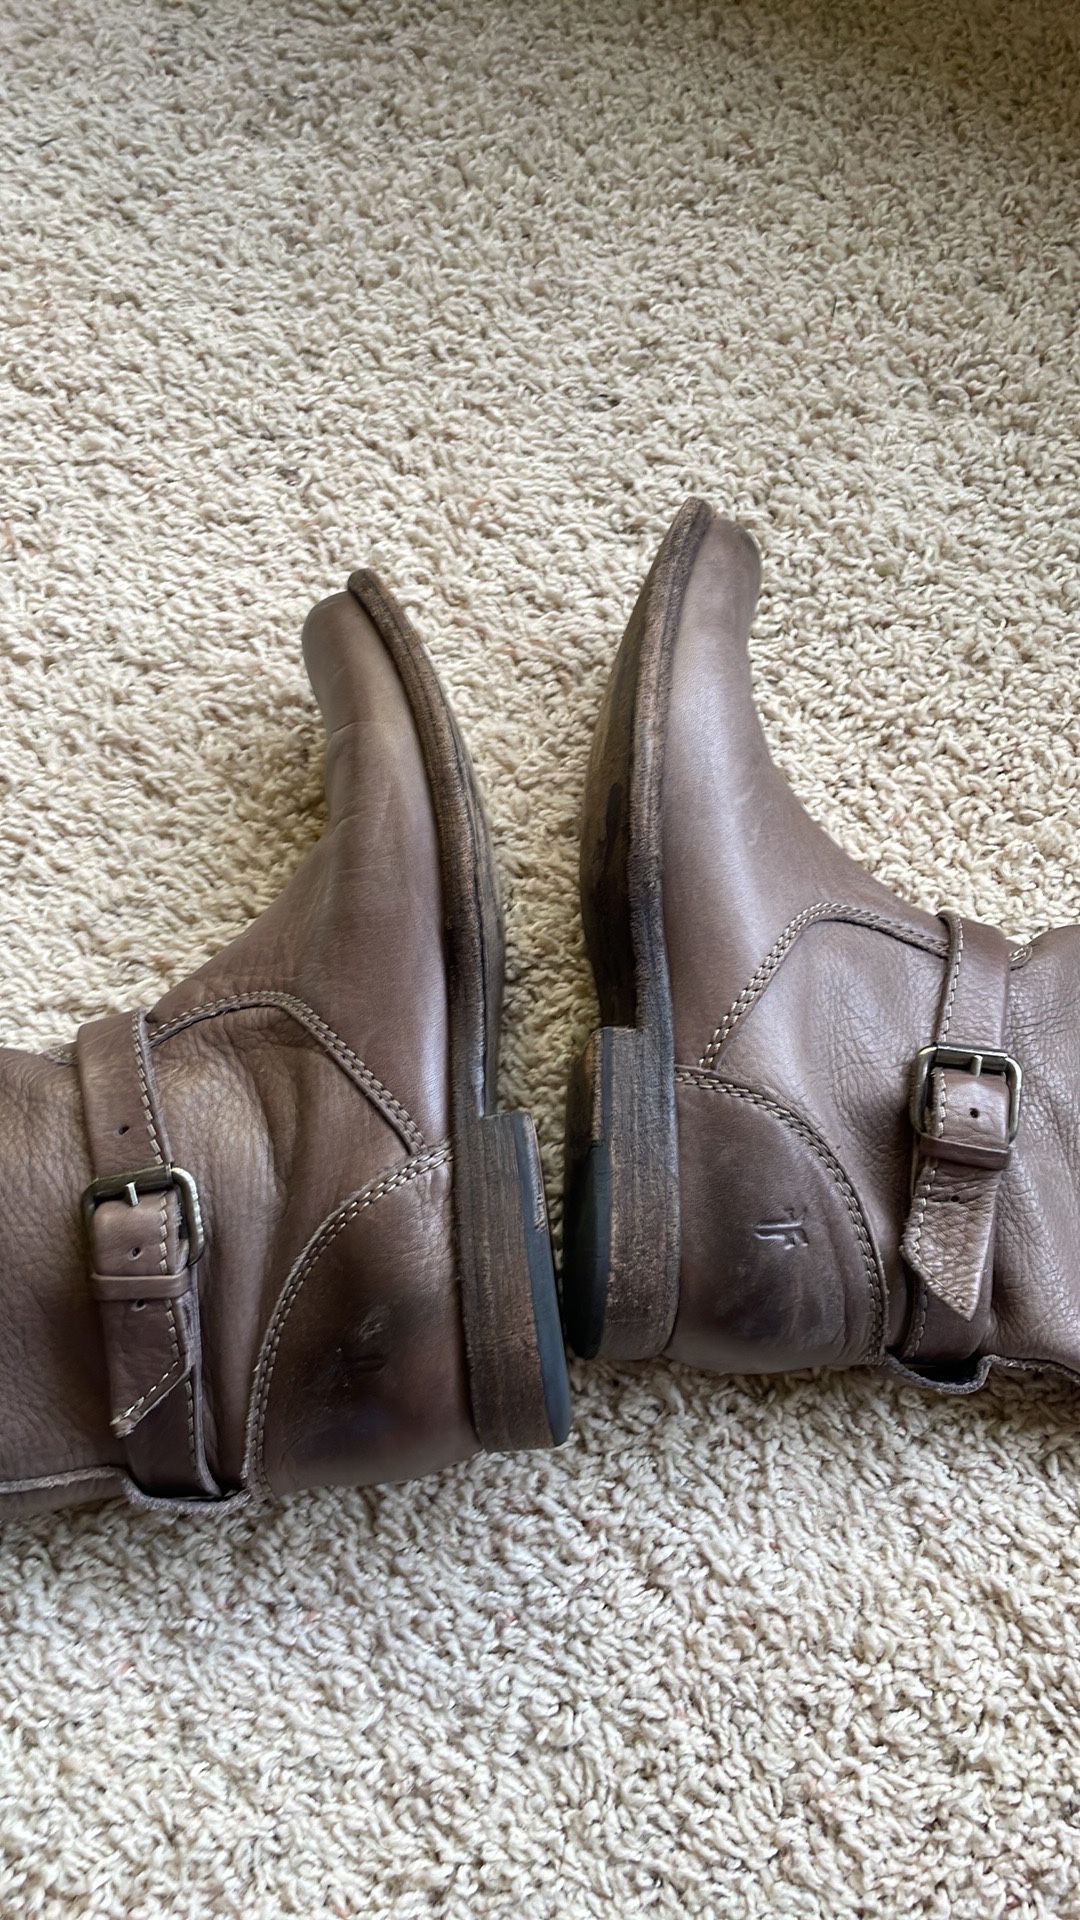 Frye Boots “Phillip” Tall Taupe Riding boots  7.5